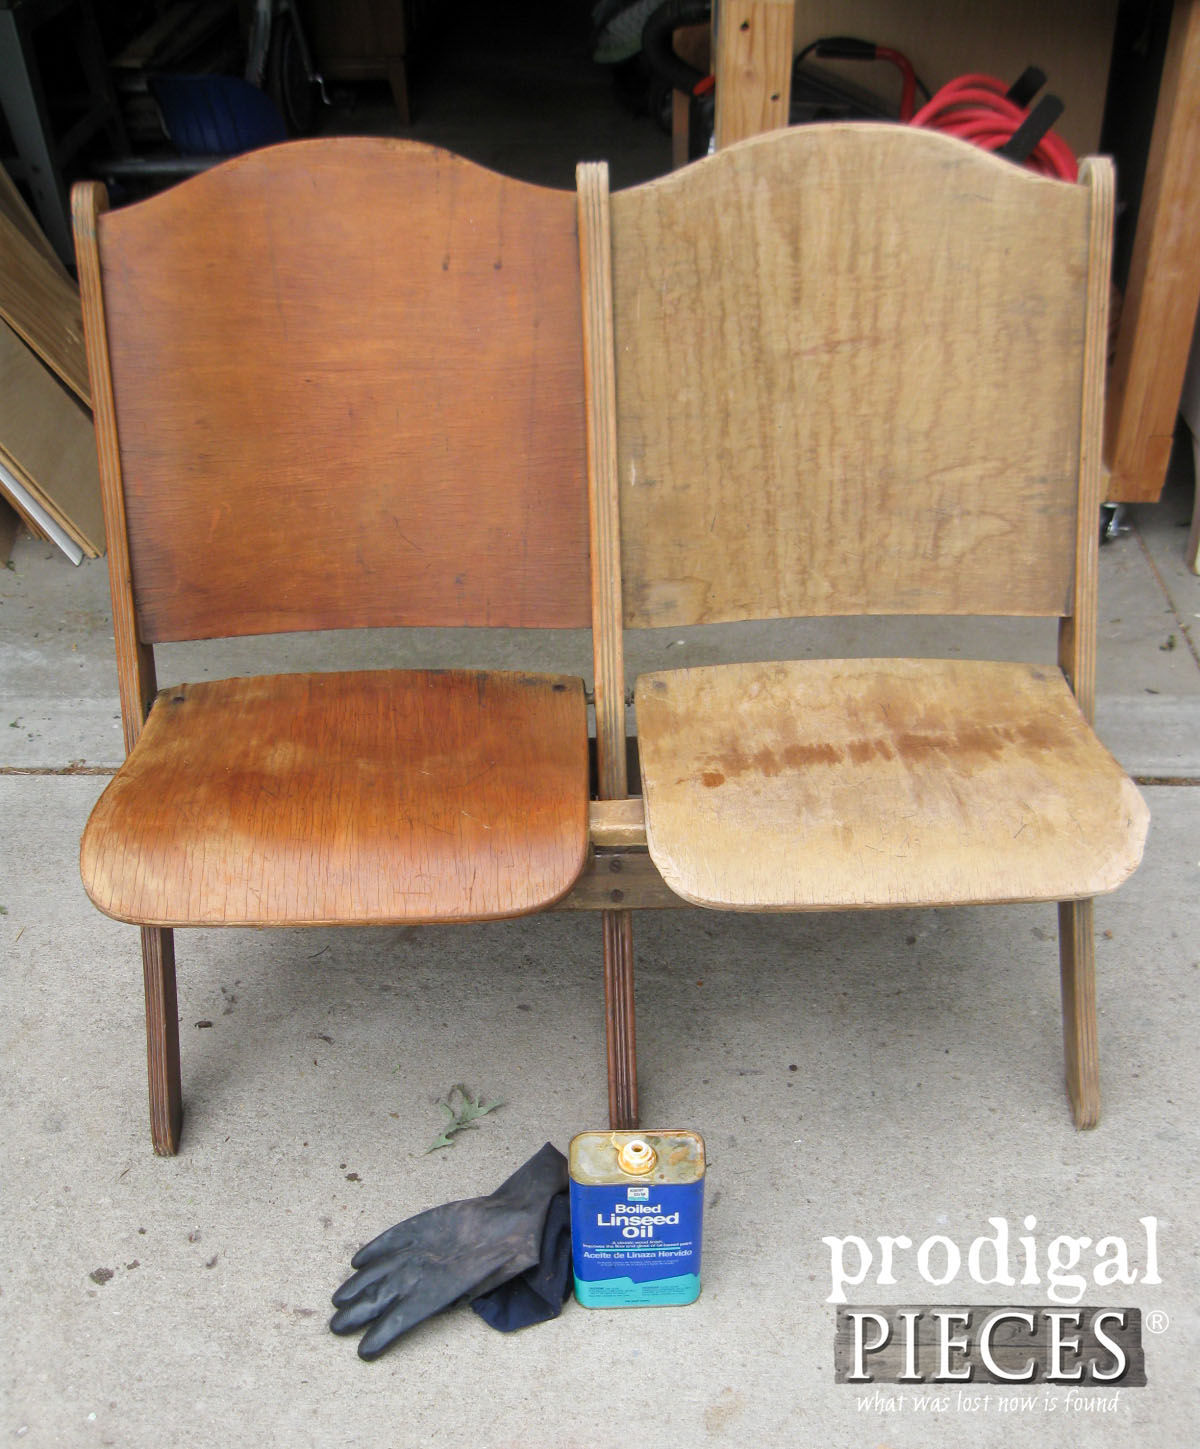 Old Theater Seats Revived with Easy Treatment to Refresh Old Wood | Prodigal Pieces | www.prodigalpieces.com